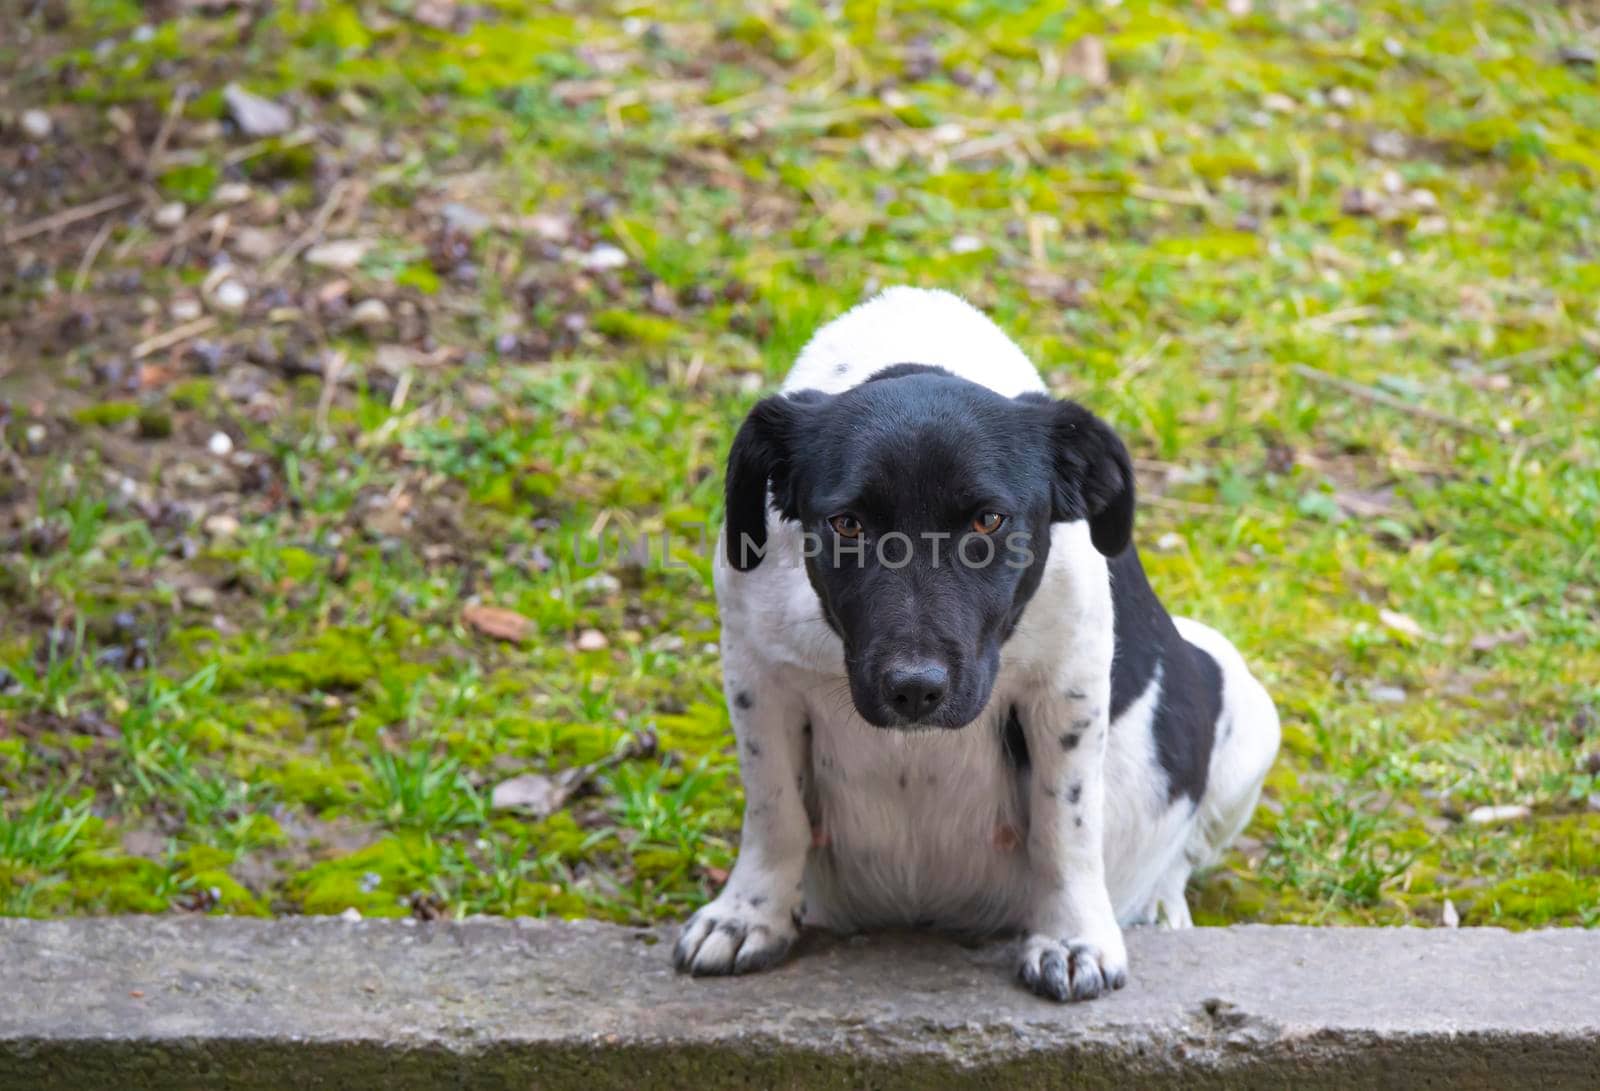 poor lonely black and white street dog